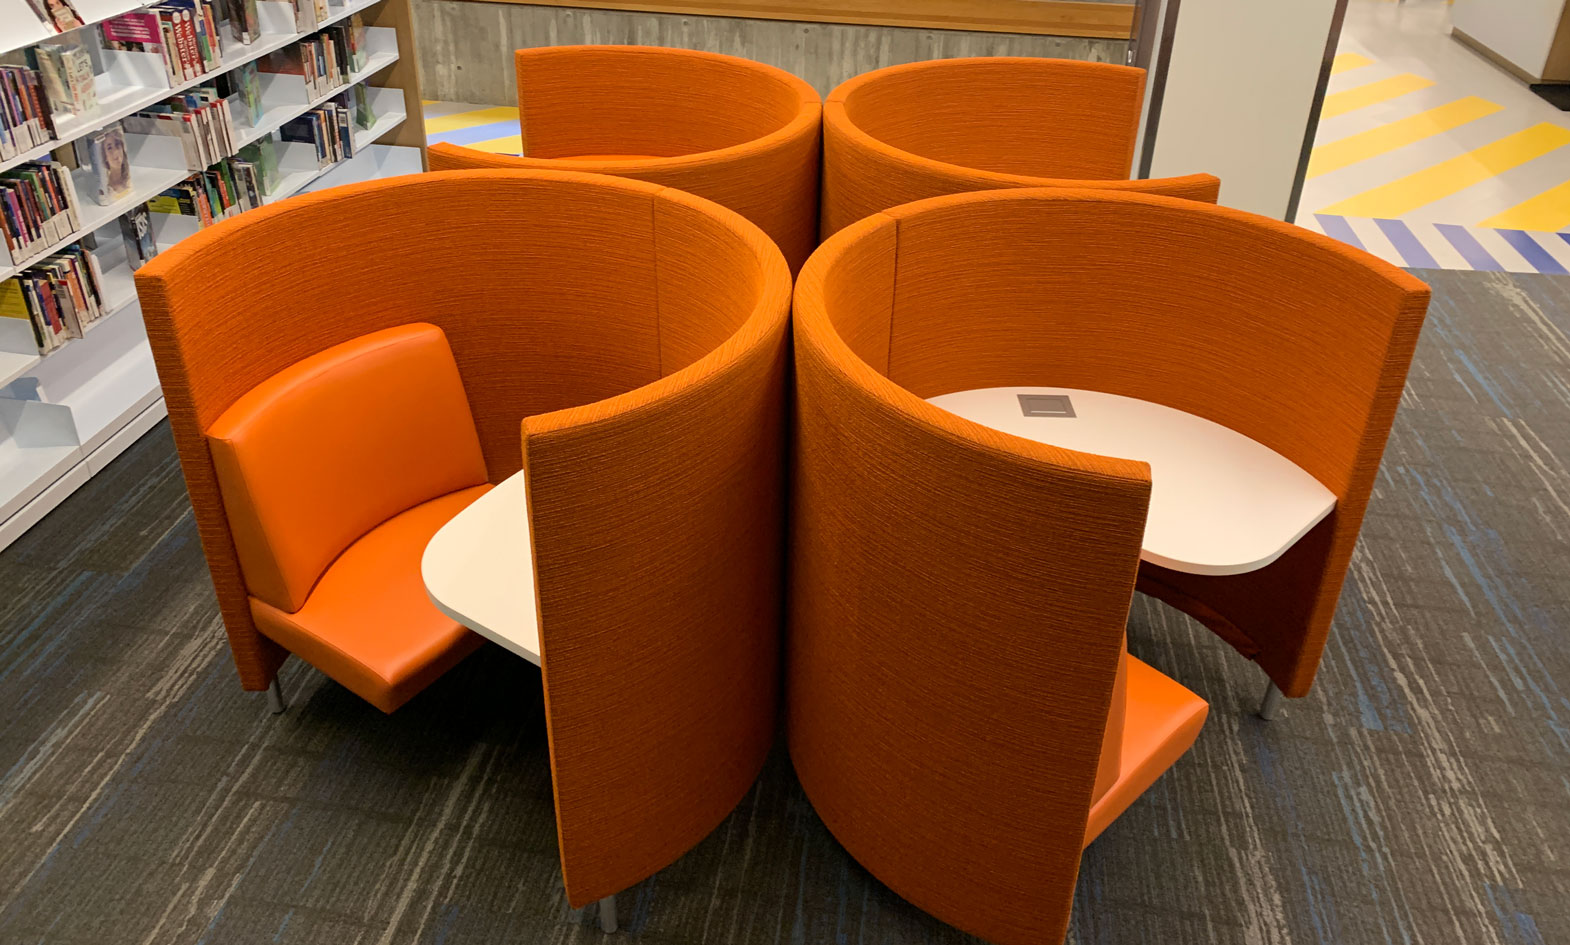 POD study carrels shown in vibrant orange with access to power in public library